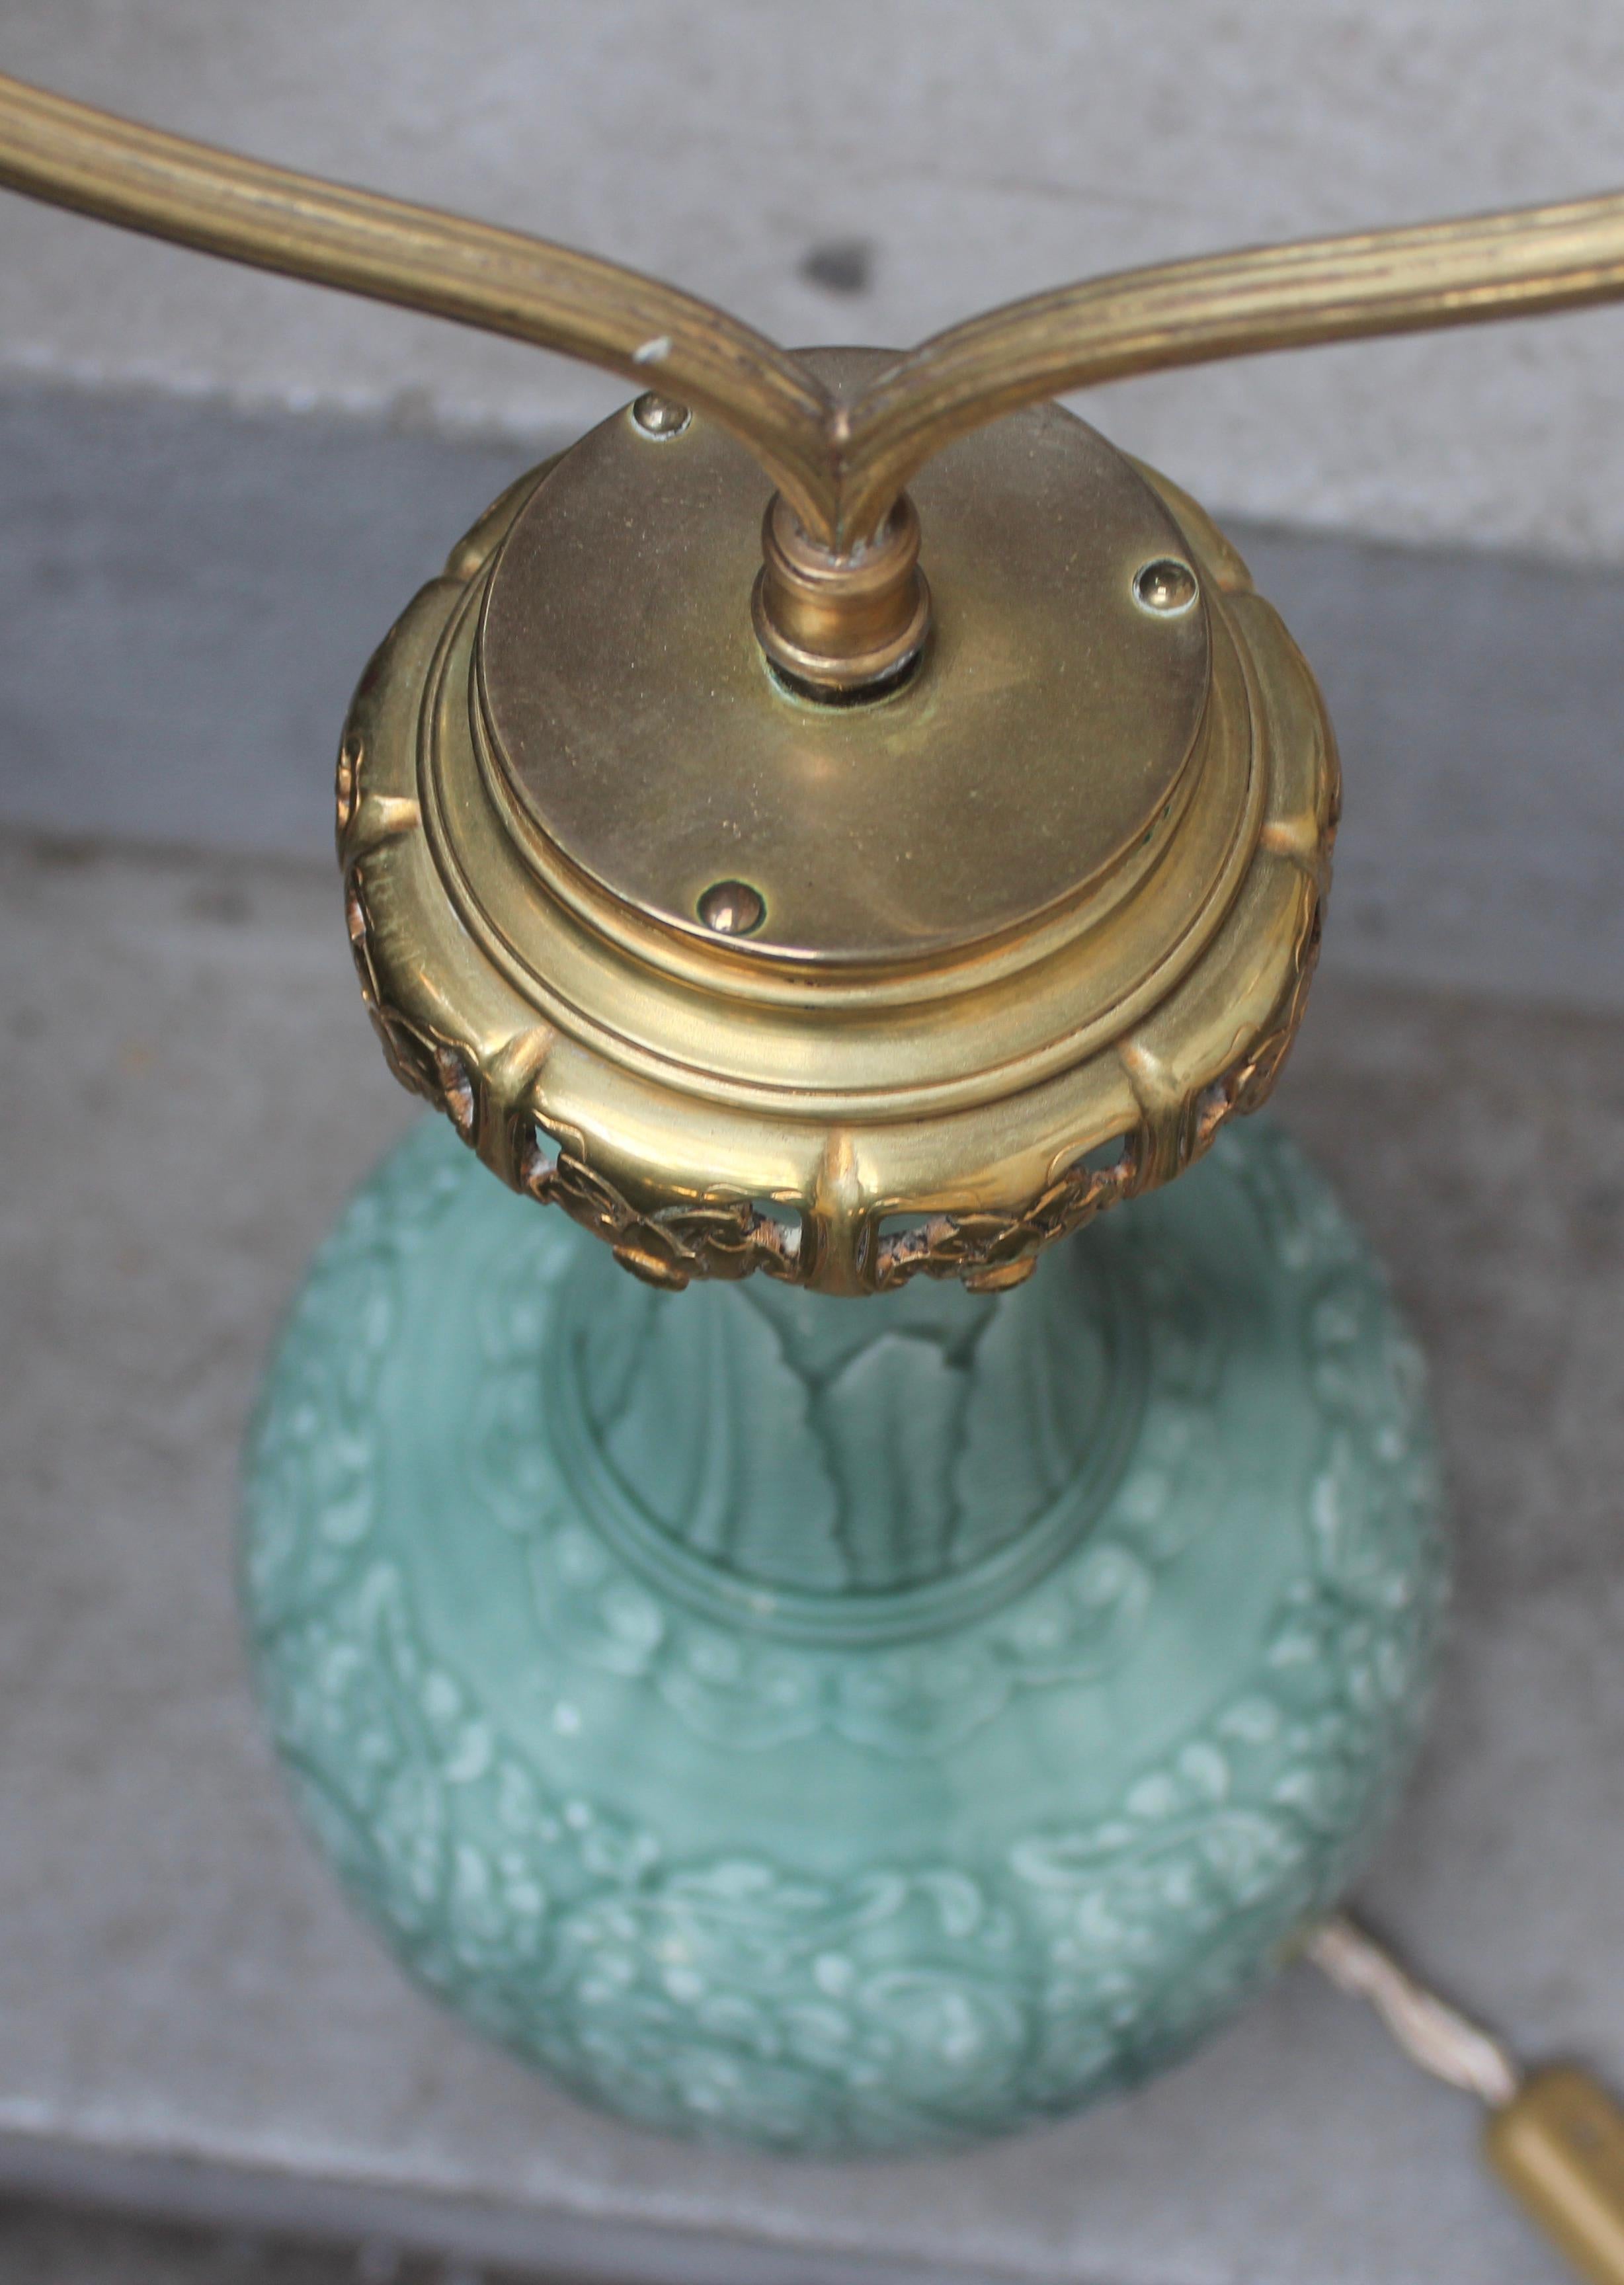 French Theodore Deck Faience Enameled Vase Ormolu-Mounted in Lamp, circa 1880